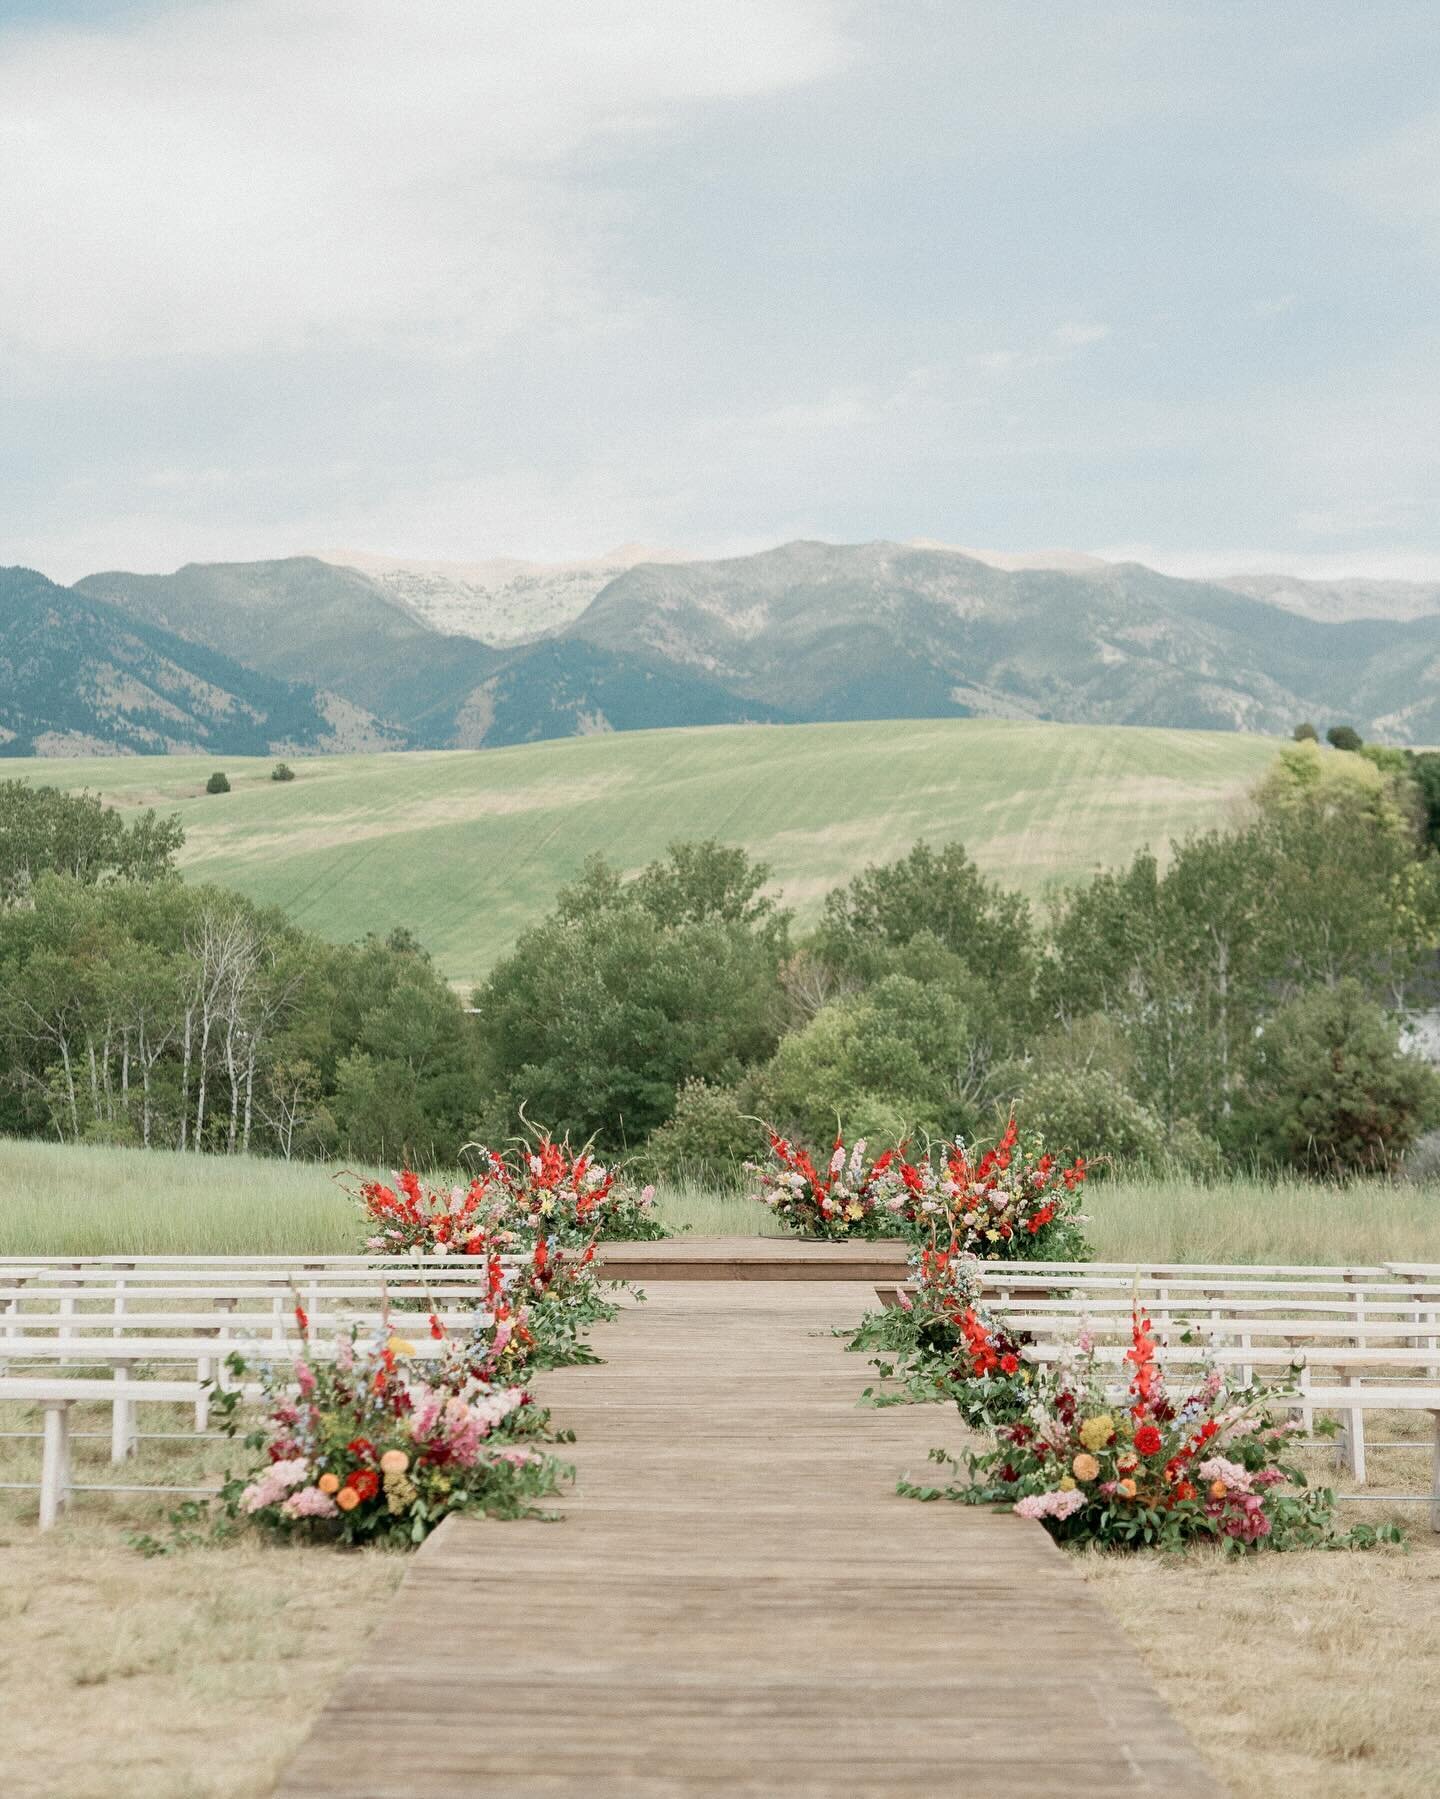 A dreamy but simple ceremony space. 
&mdash;

Taken alongside @courtneydueppengiesser